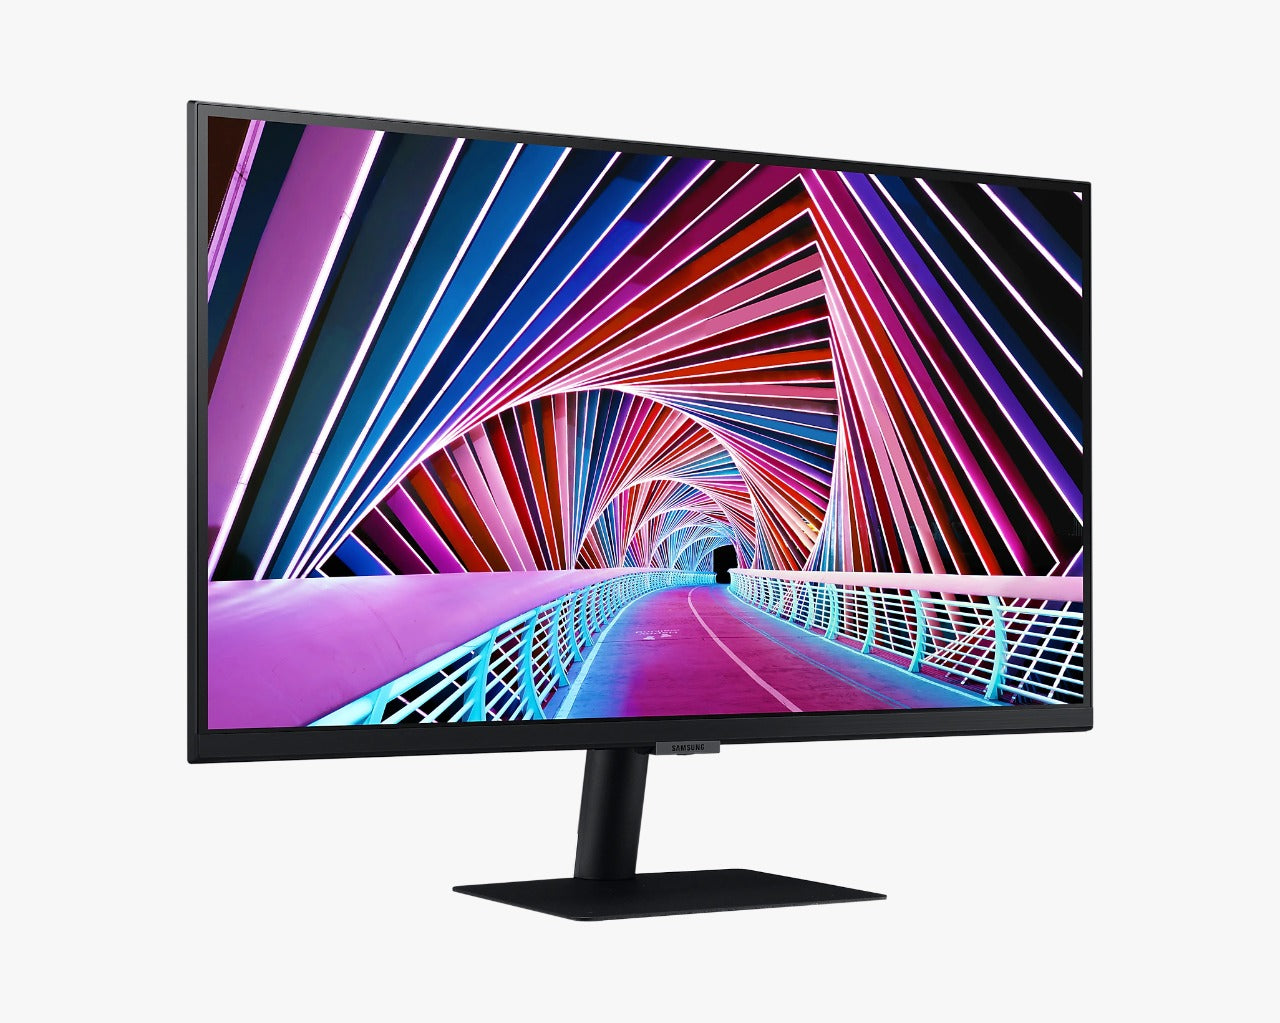 Samsung 68.5cm (27") High Resolution Monitors with 178° all around viewing angle